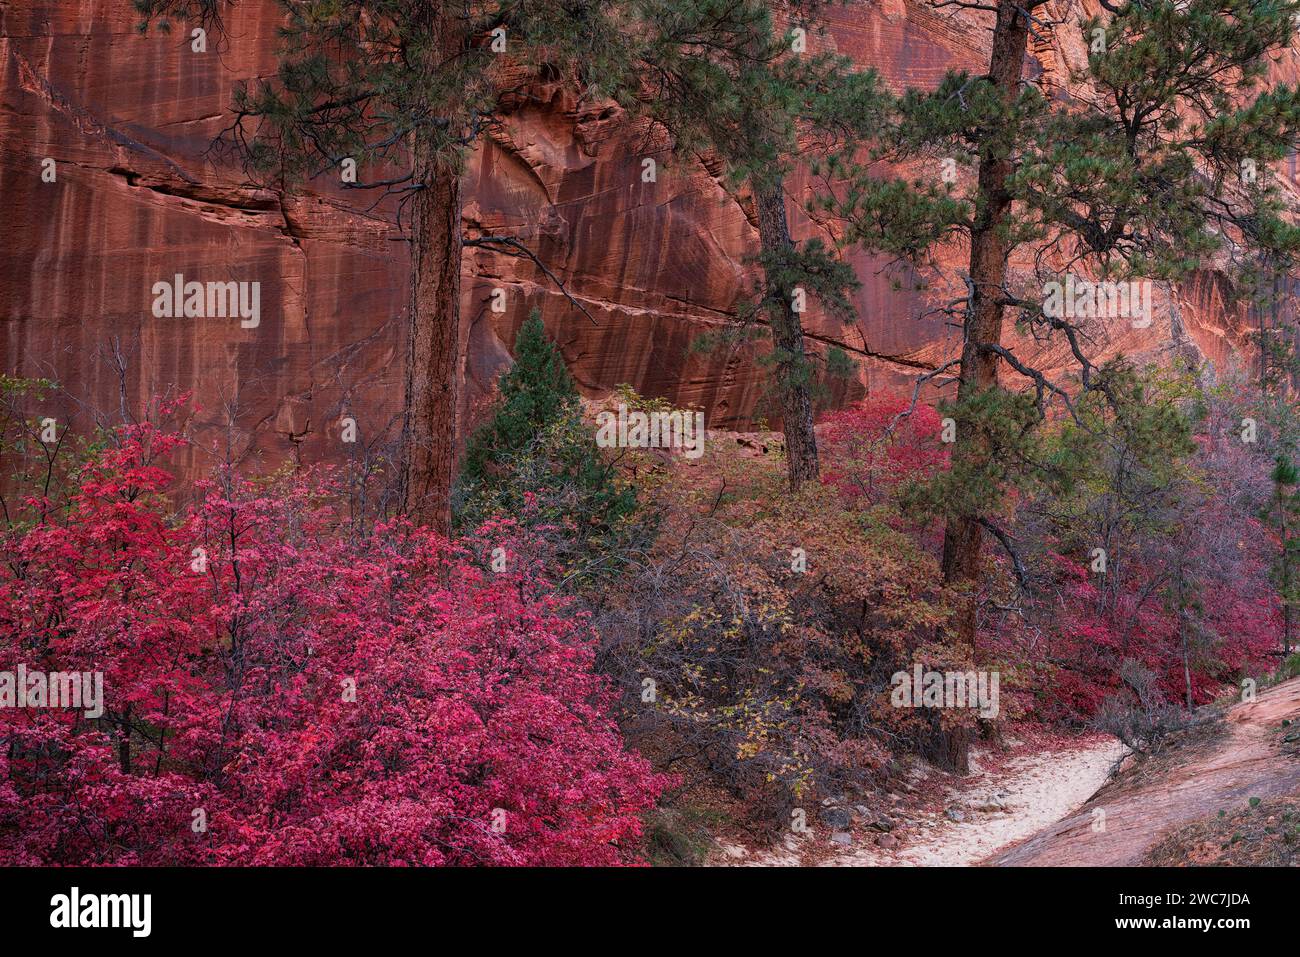 Majestic ponderosa pines and bigtooth maples during autumn in Zion National Park, Utah Stock Photo